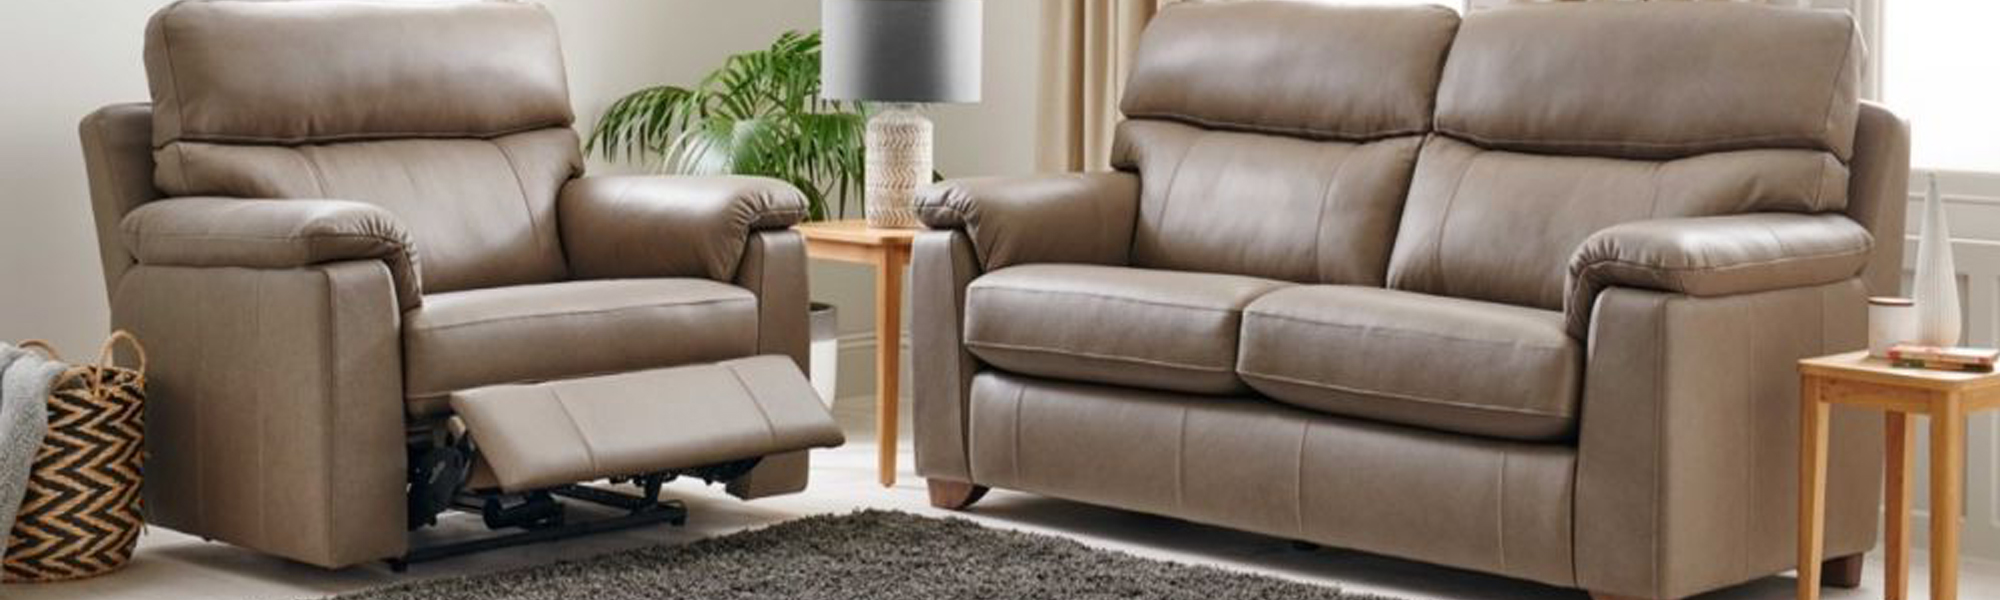 Leather 3 Seater Manual Recliners